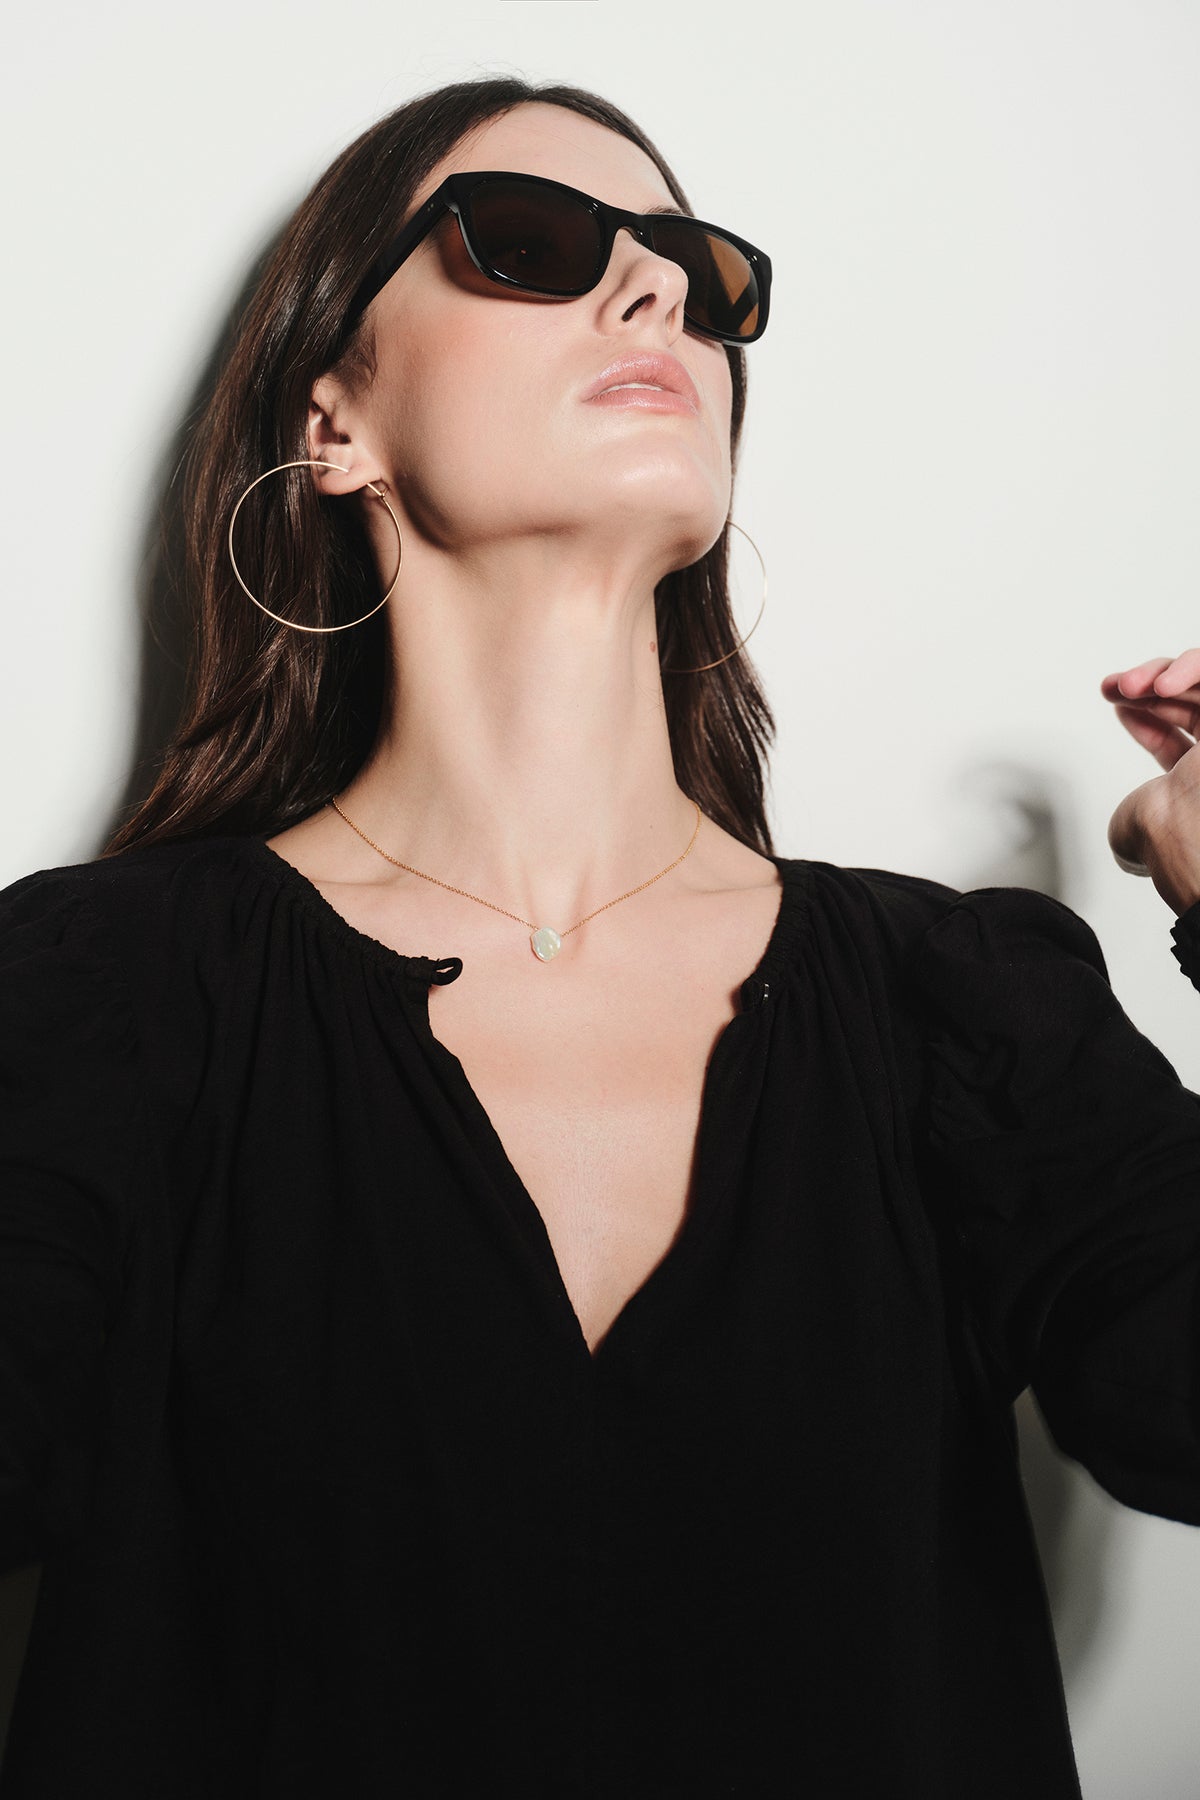 A woman wearing BYCHARI sunglasses and a black top.-26887533232321